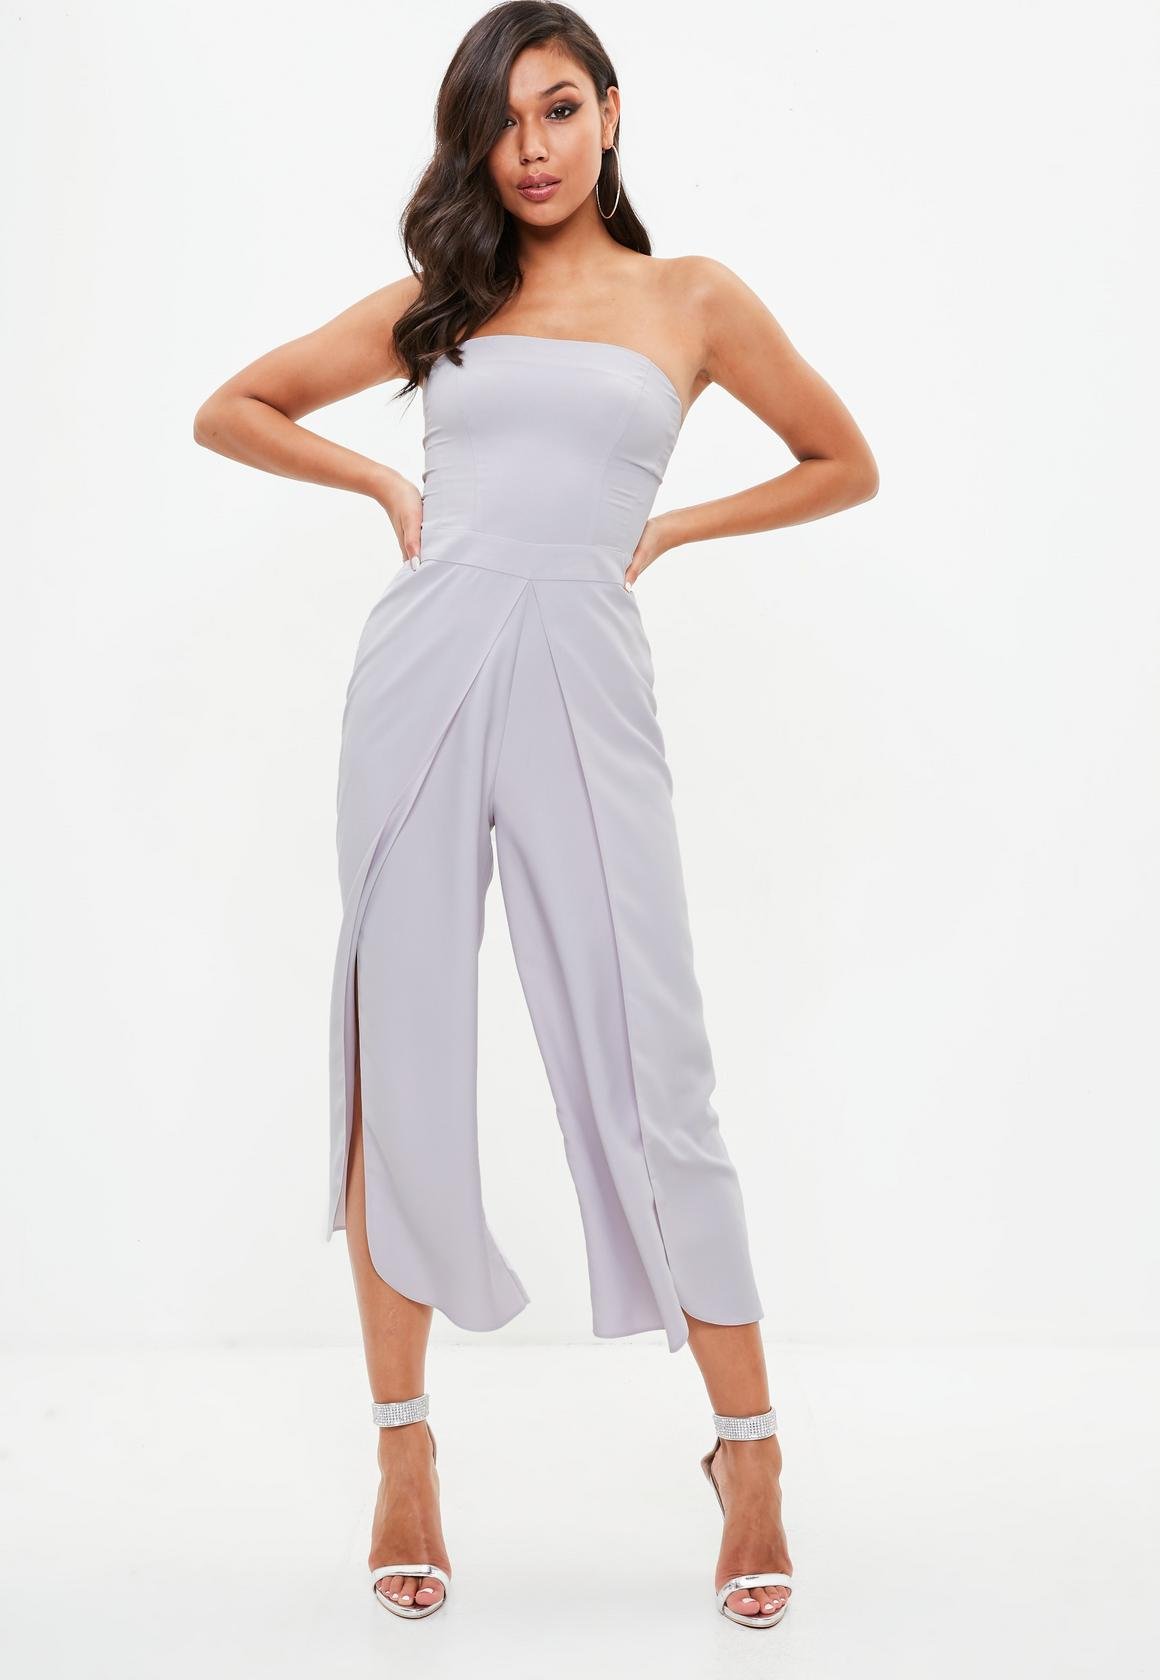 Missguided UK: #trending: pastels | Milled